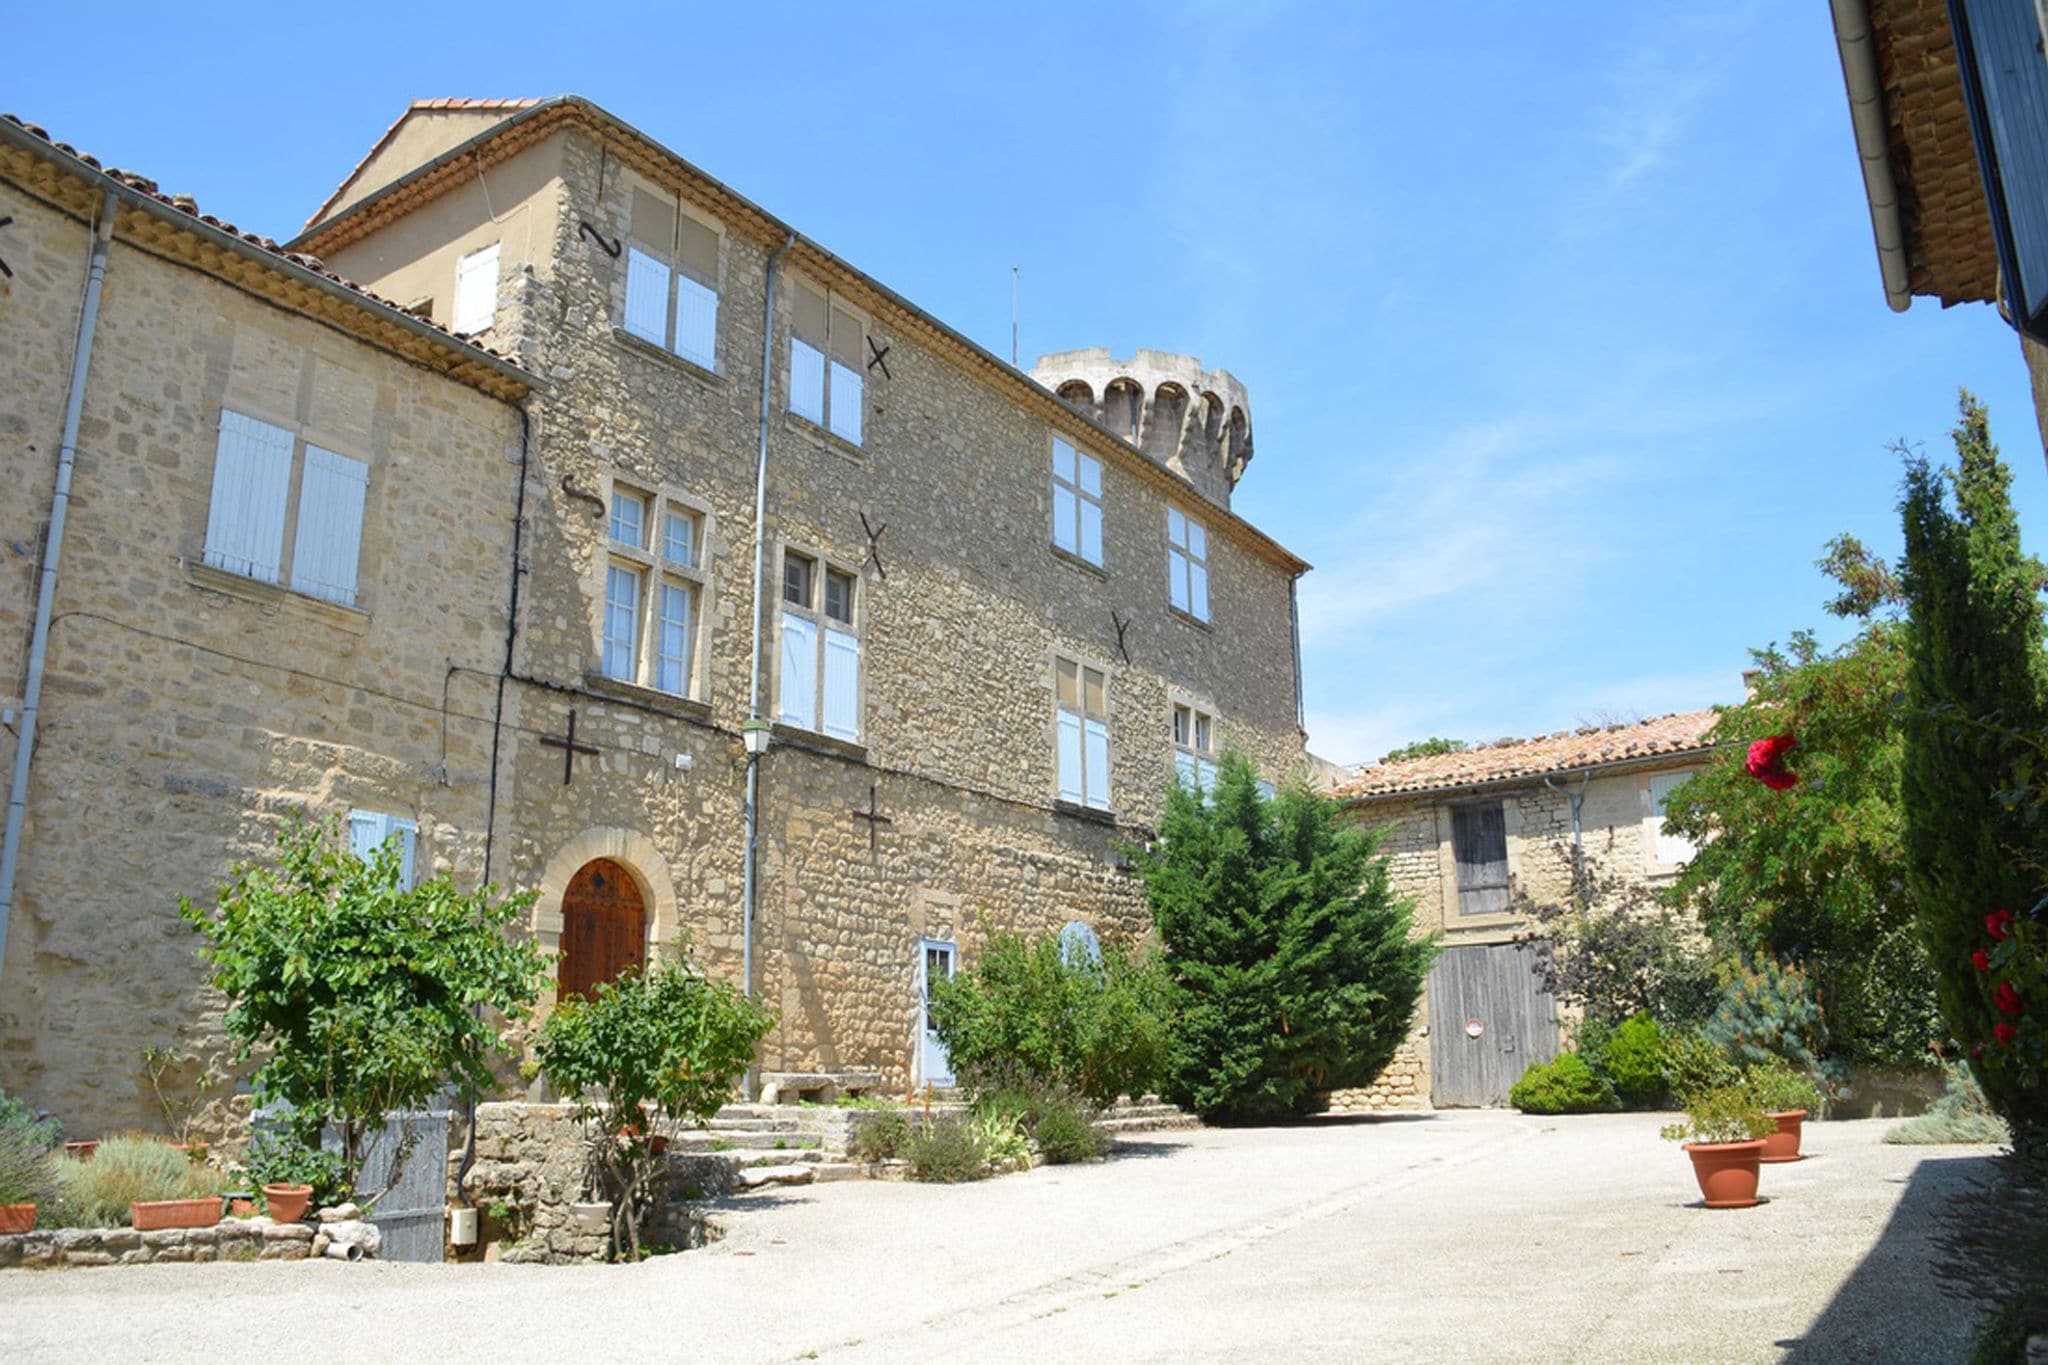 Stylish villa with private pool in the middle of a village in the beautiful Luberon